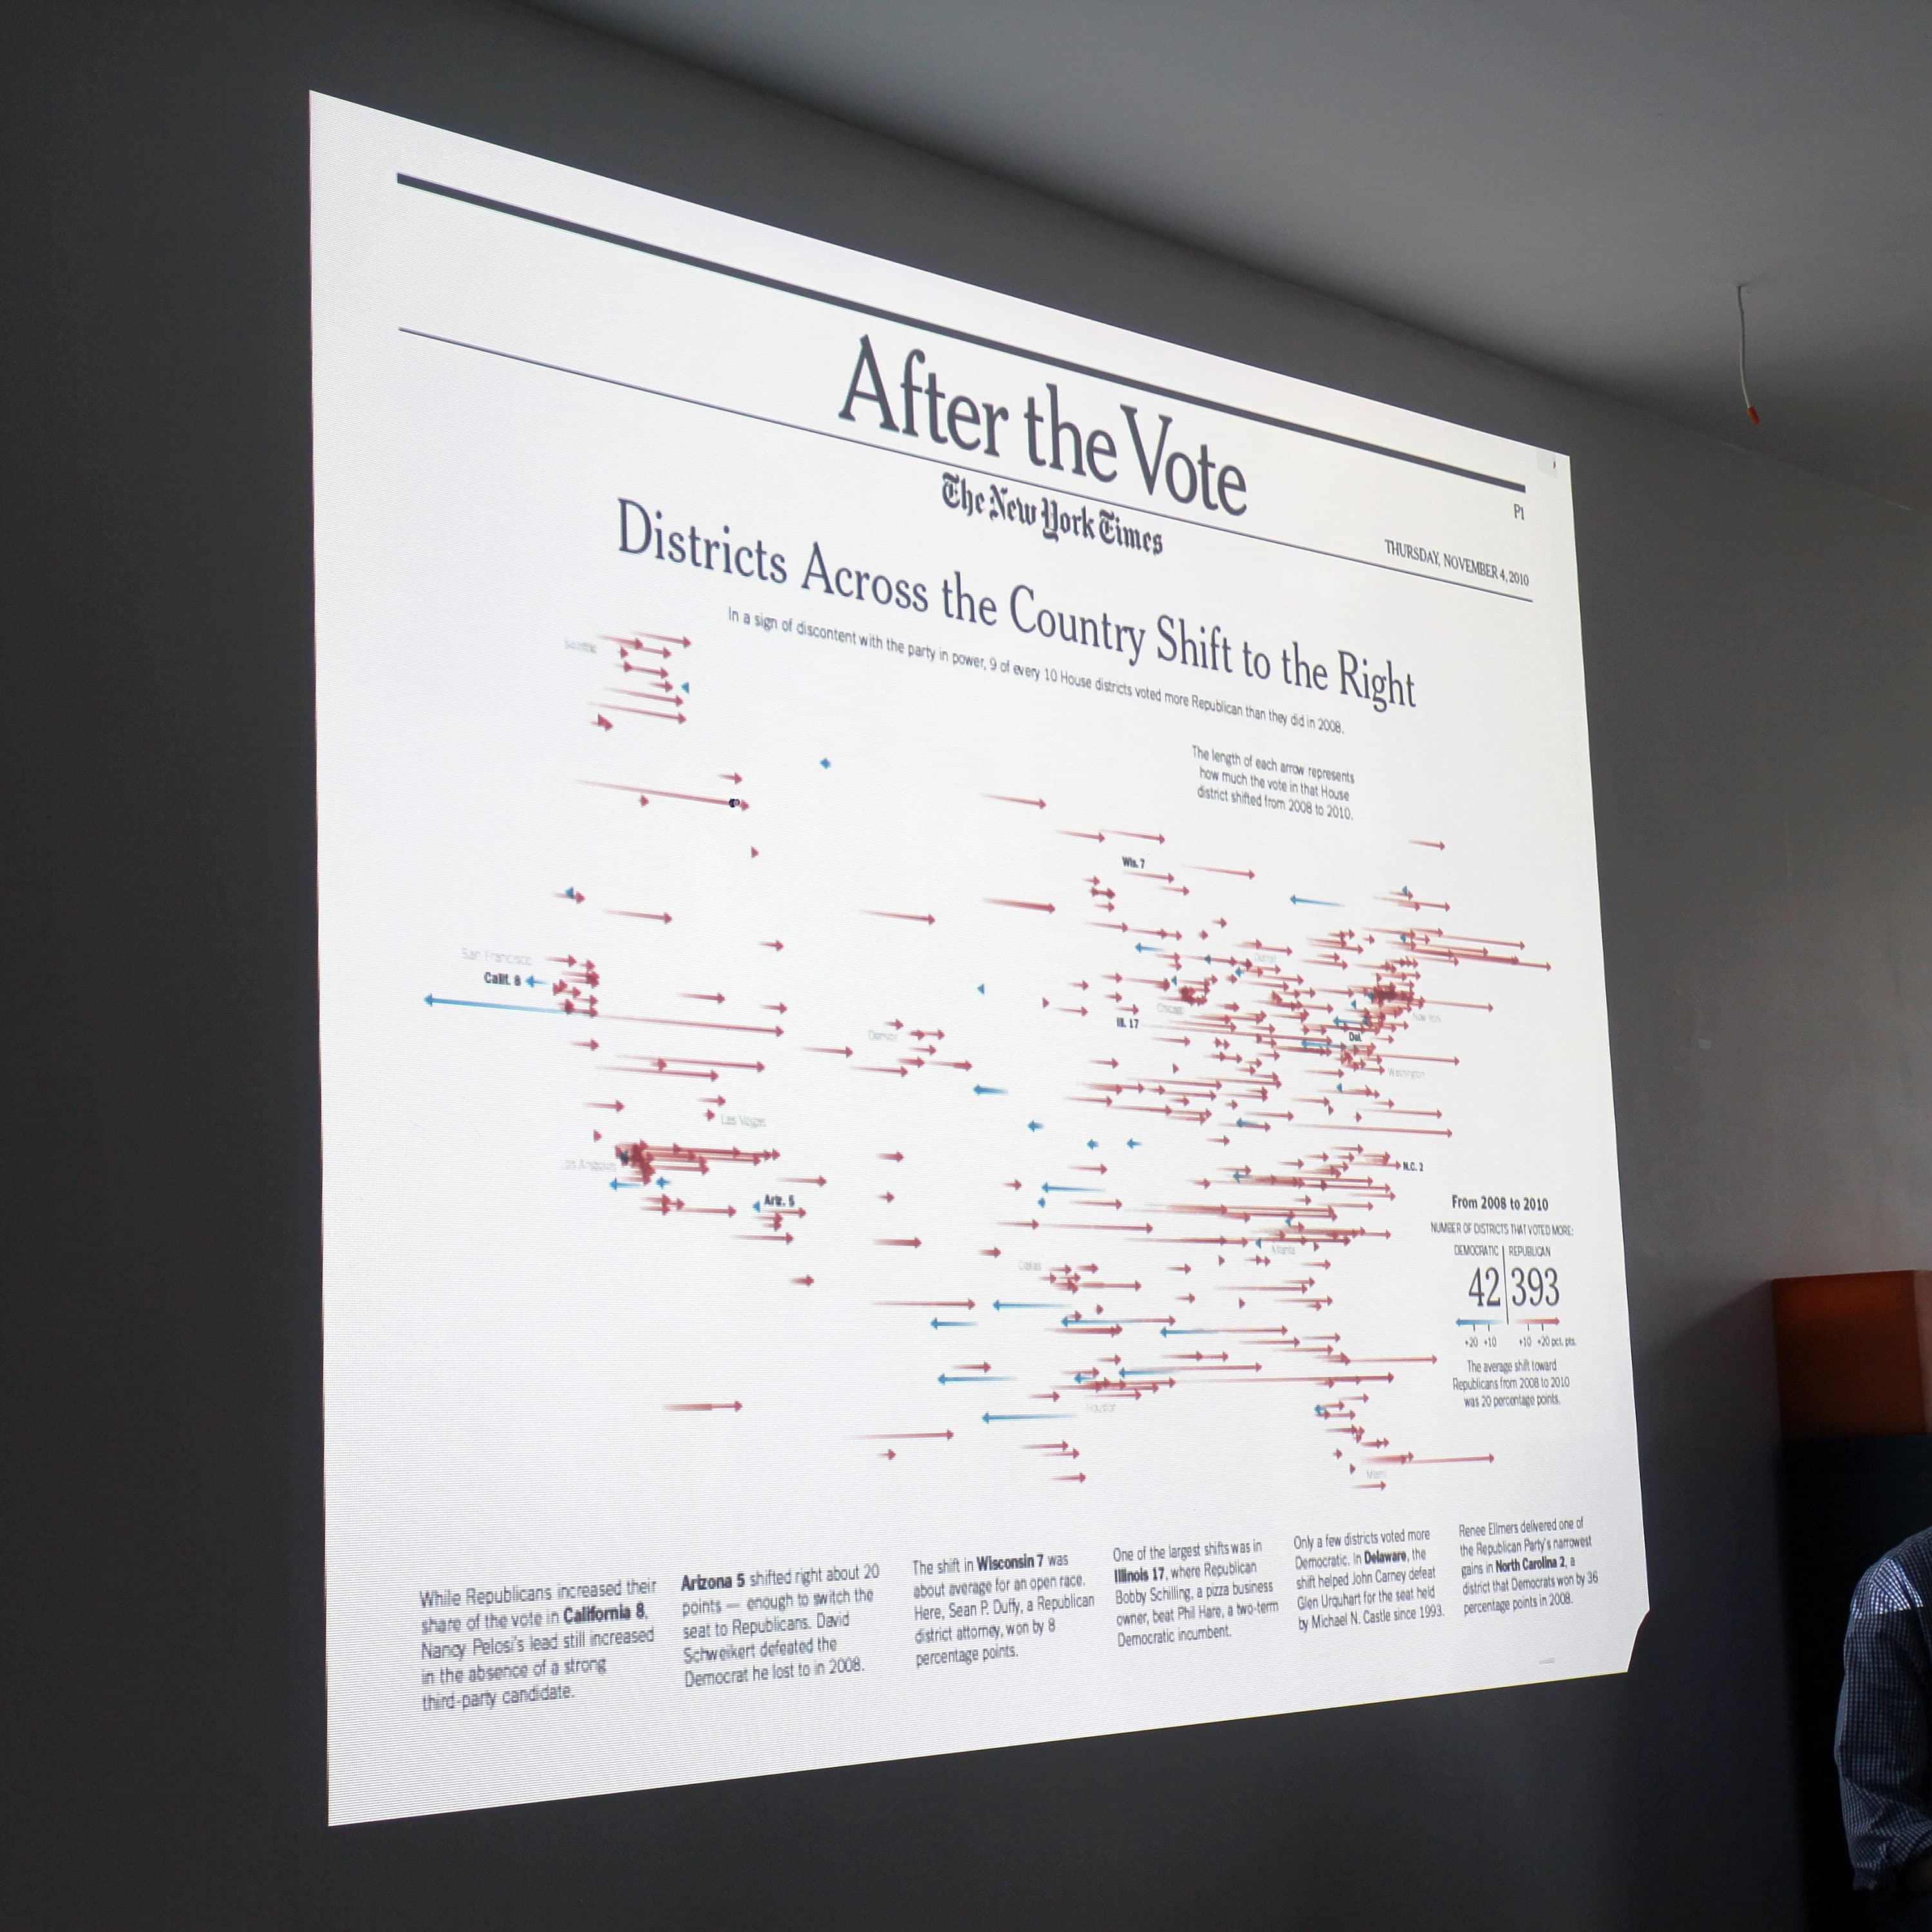 A presentation slide displays a headline reading "After the Vote" and a subtitle "Districts Across the Country Shift to the Right". The slide shows a U.S. map with red and blue lines indicating political shifts. A man is seated on the right side of the image.